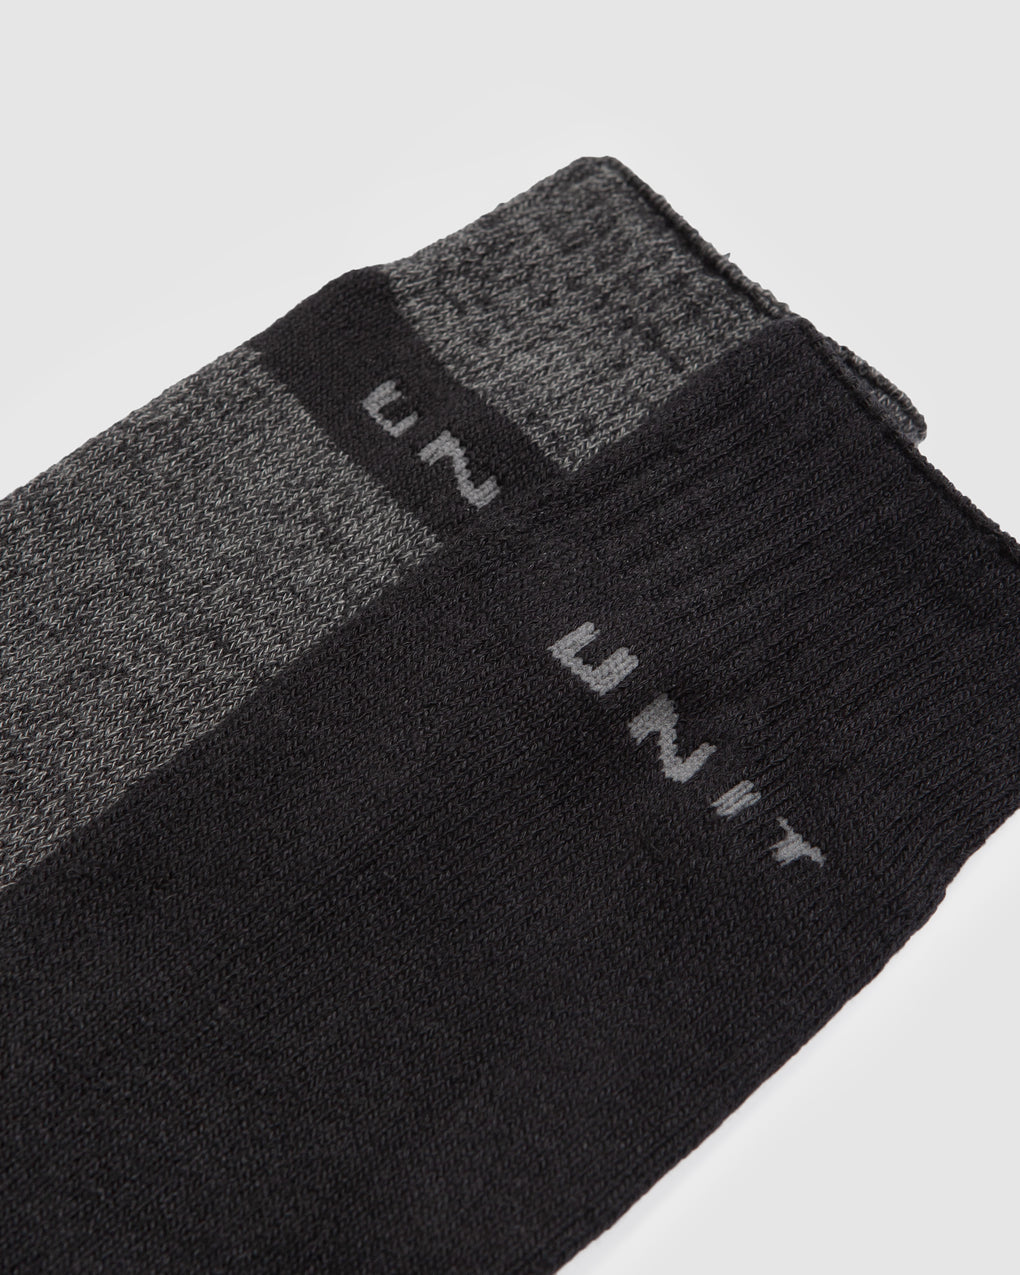 UNIT Task Extra Thick Bamboo Socks 2 Pack